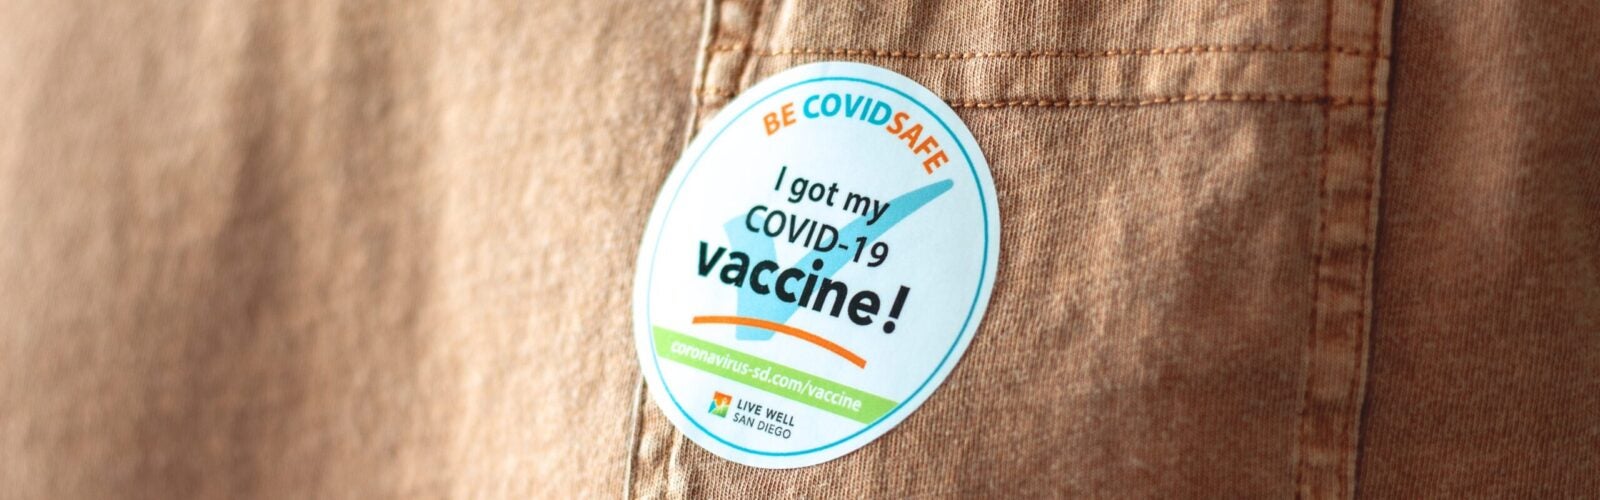 Special Section: COVID-19 Vaccine Equity and Human Rights